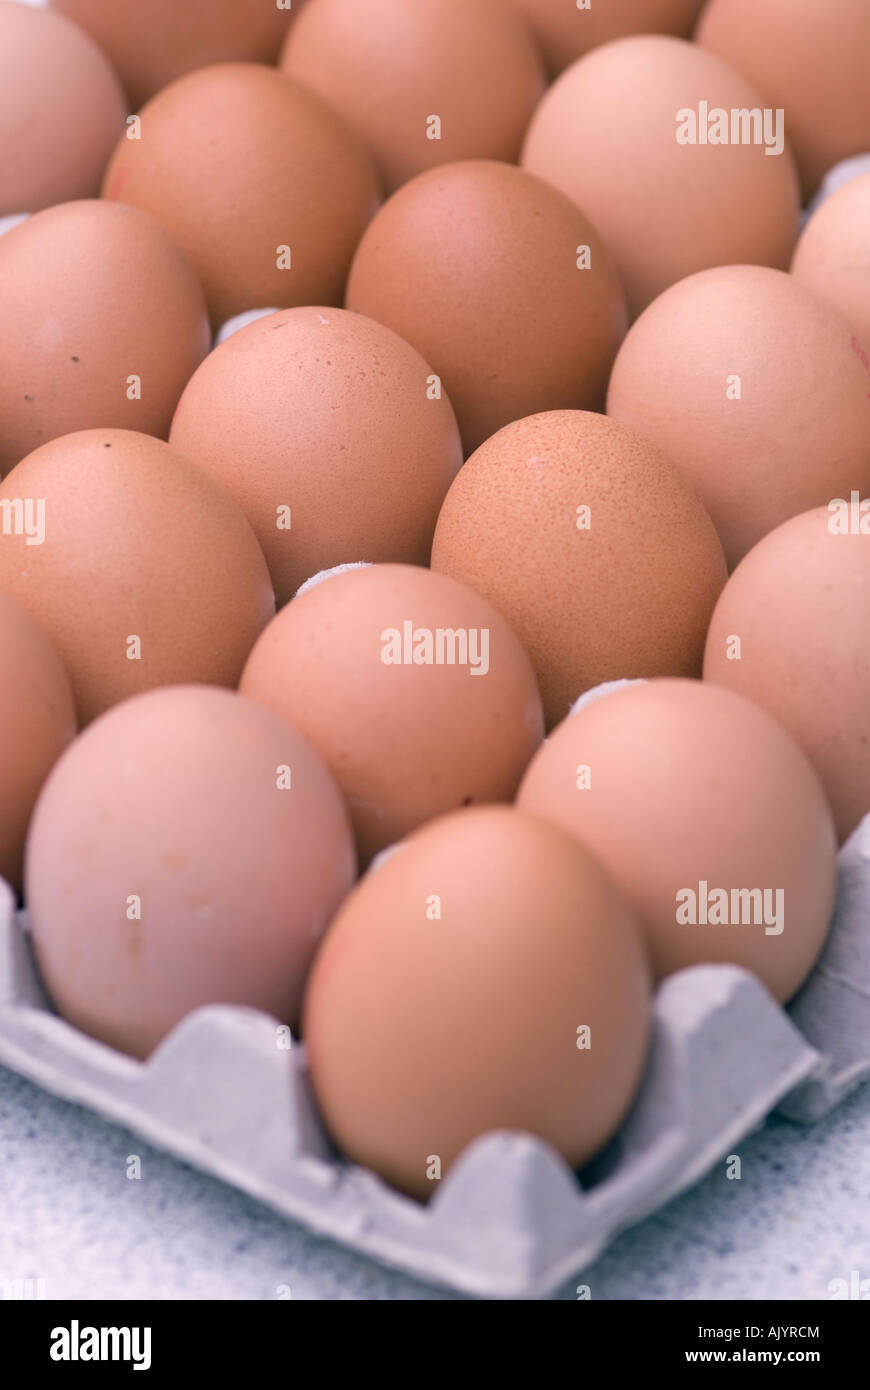 Tray of Chickens eggs Stock Photo